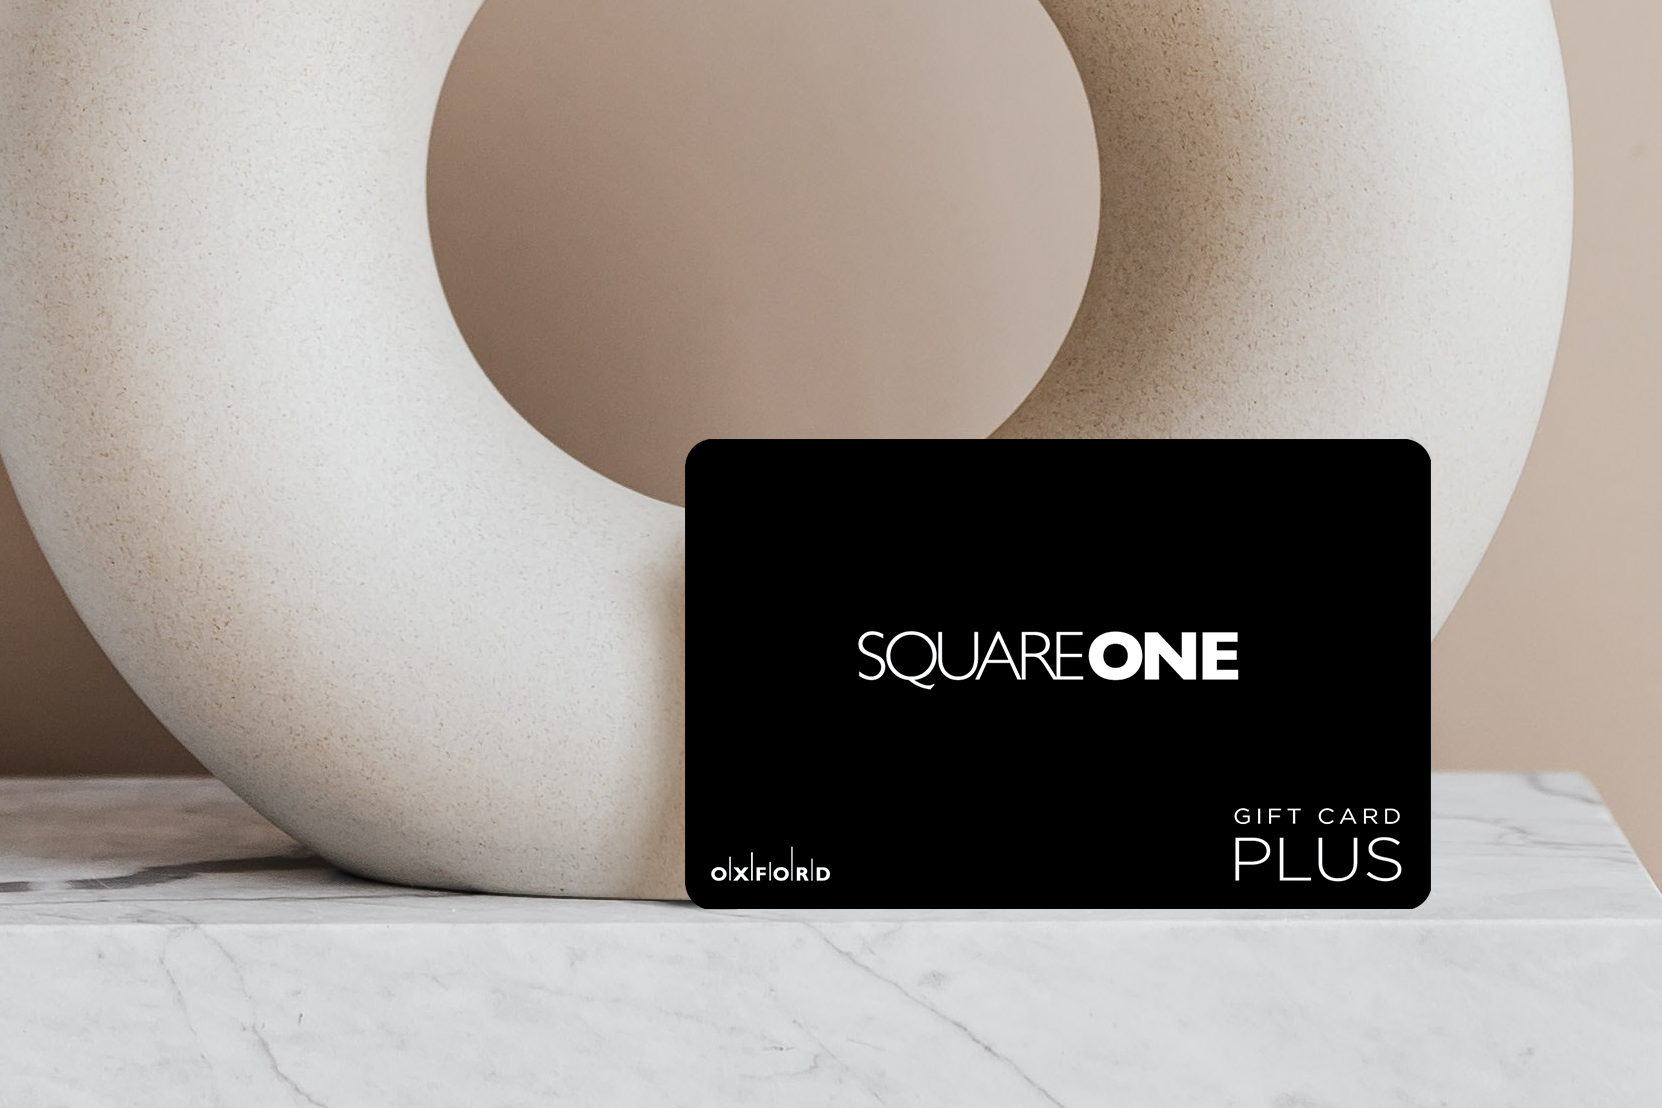 promotional image of a black square one gift card in front of a neutral circular vase